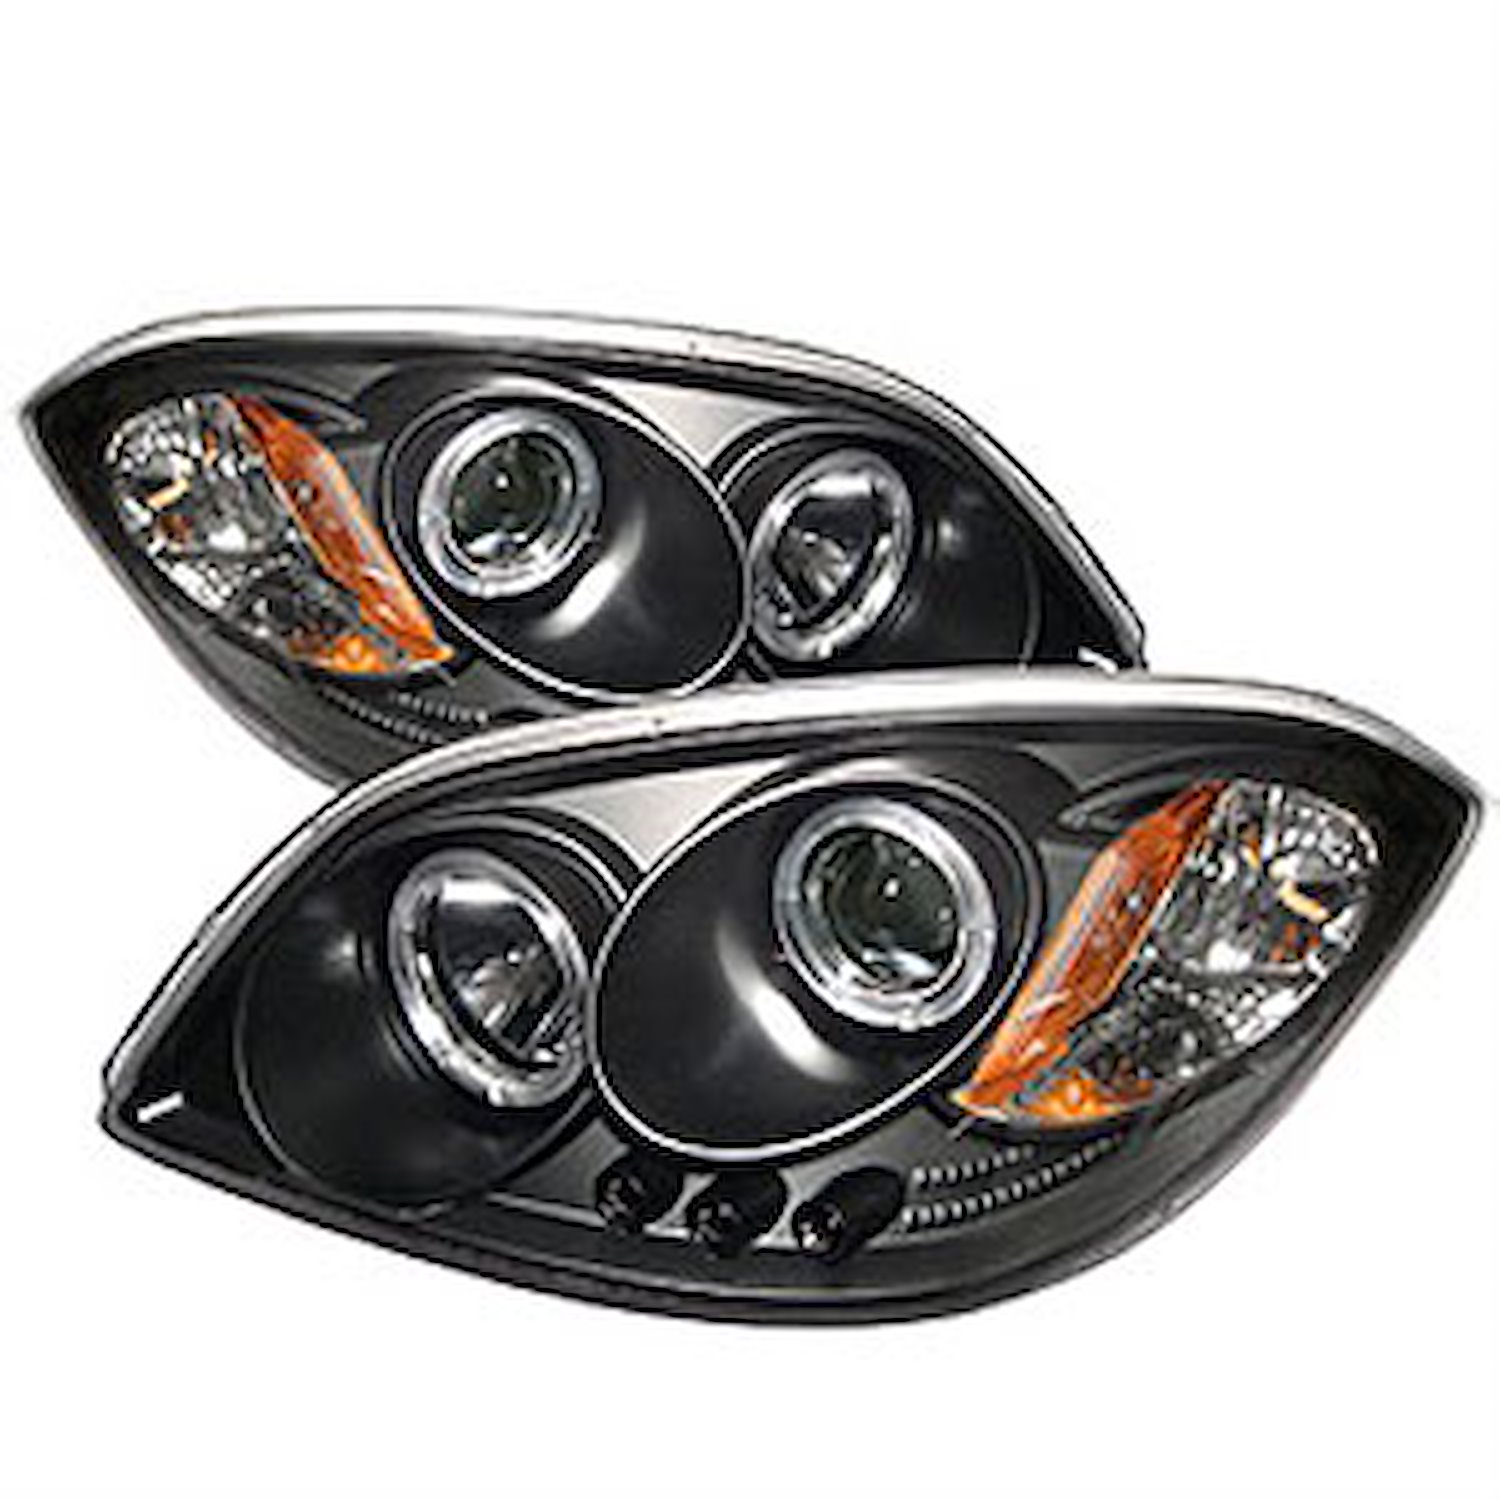 Halo LED Projector Headlights 2005-2010 Chevy Cobalt